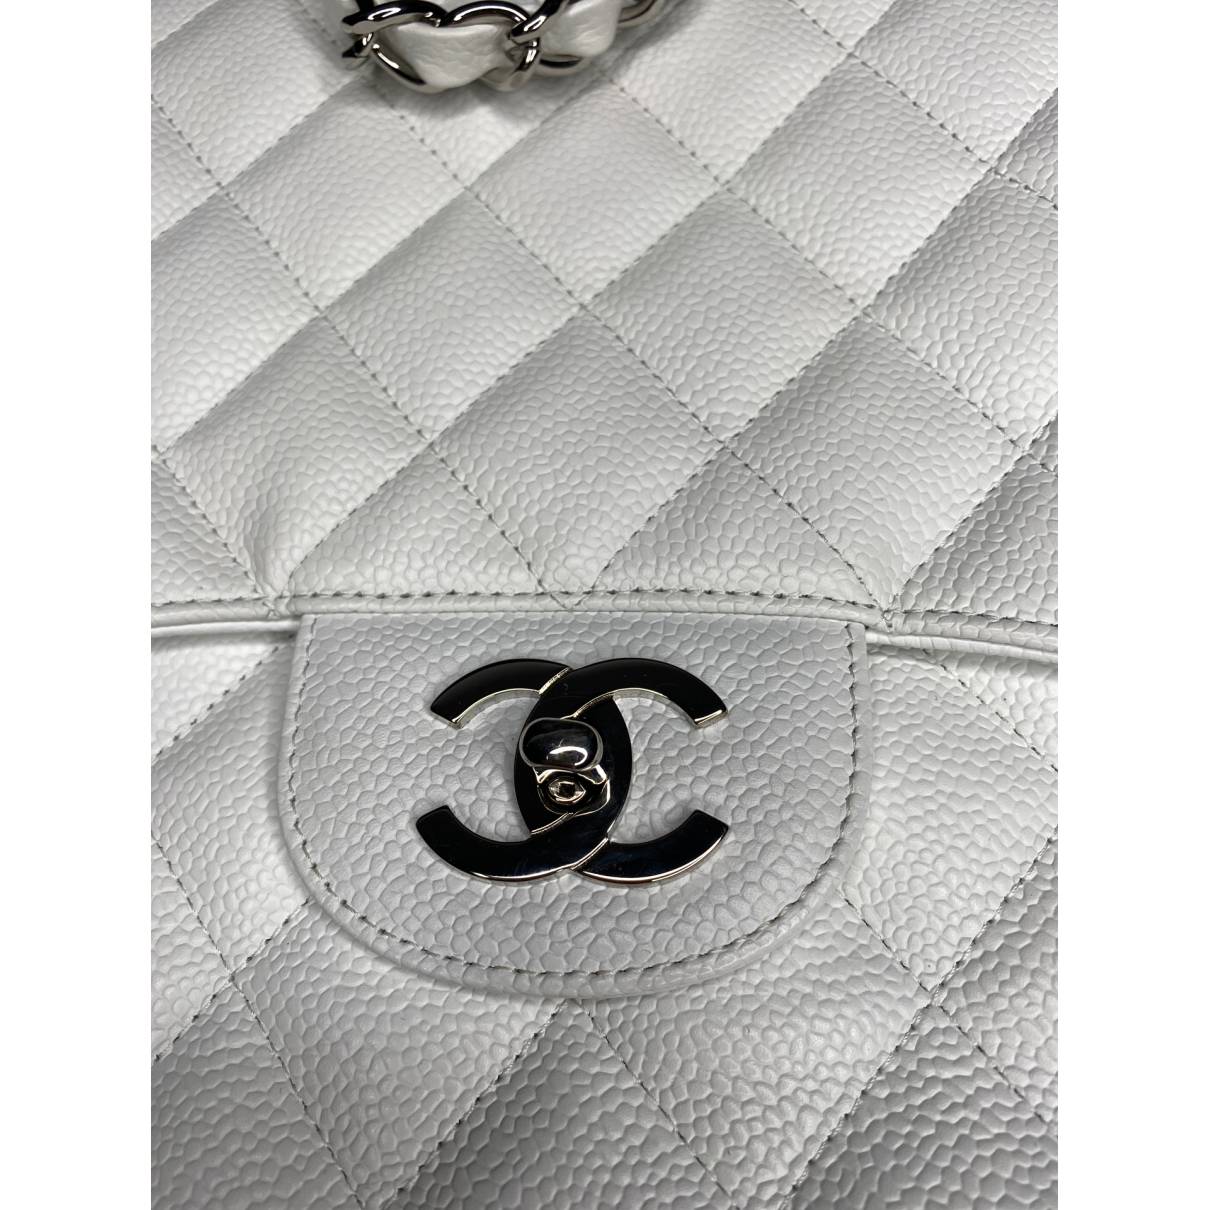 Chanel - Authenticated Timeless/Classique Handbag - Leather White Plain for Women, Very Good Condition